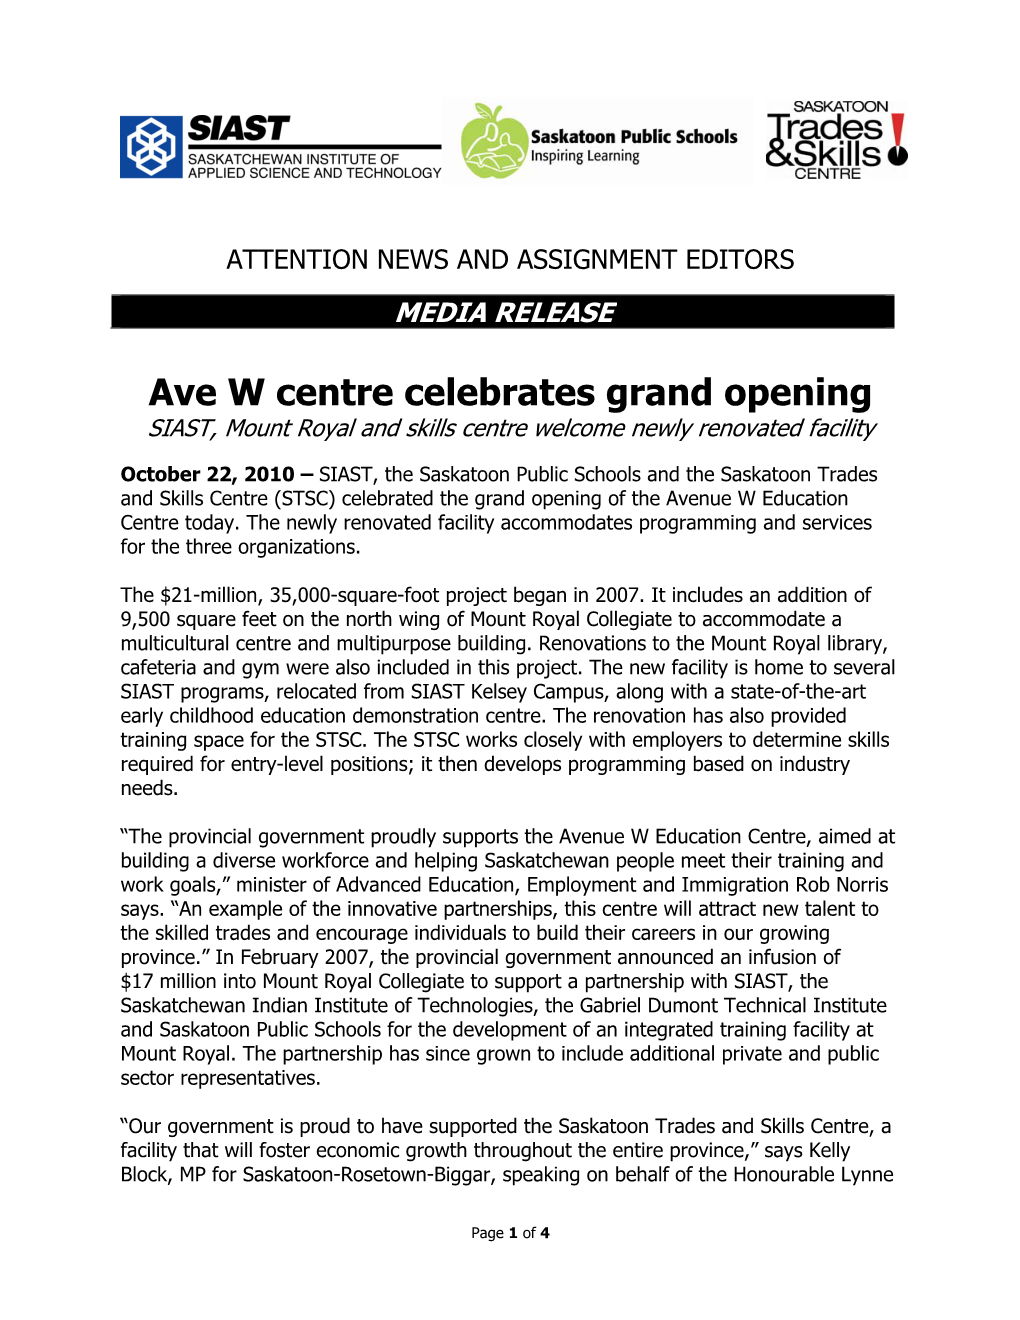 Ave W Centre Celebrates Grand Opening SIAST, Mount Royal and Skills Centre Welcome Newly Renovated Facility